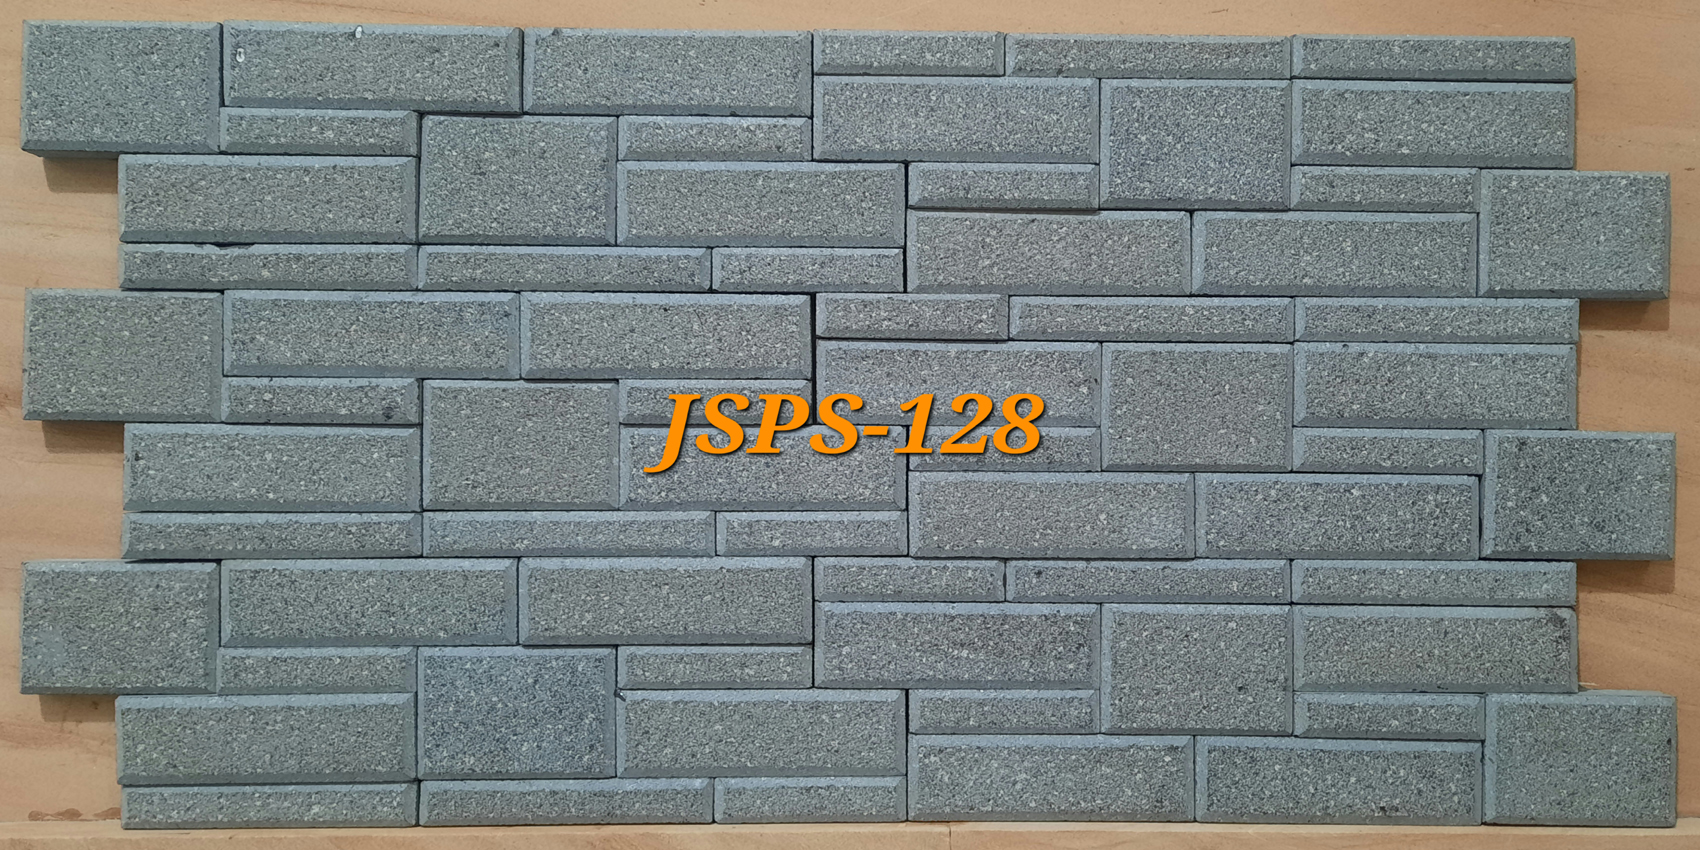 The First Stone Wall Cladding Tiles that have no effect of water -Water Proof Stone Tiles JSPS-128